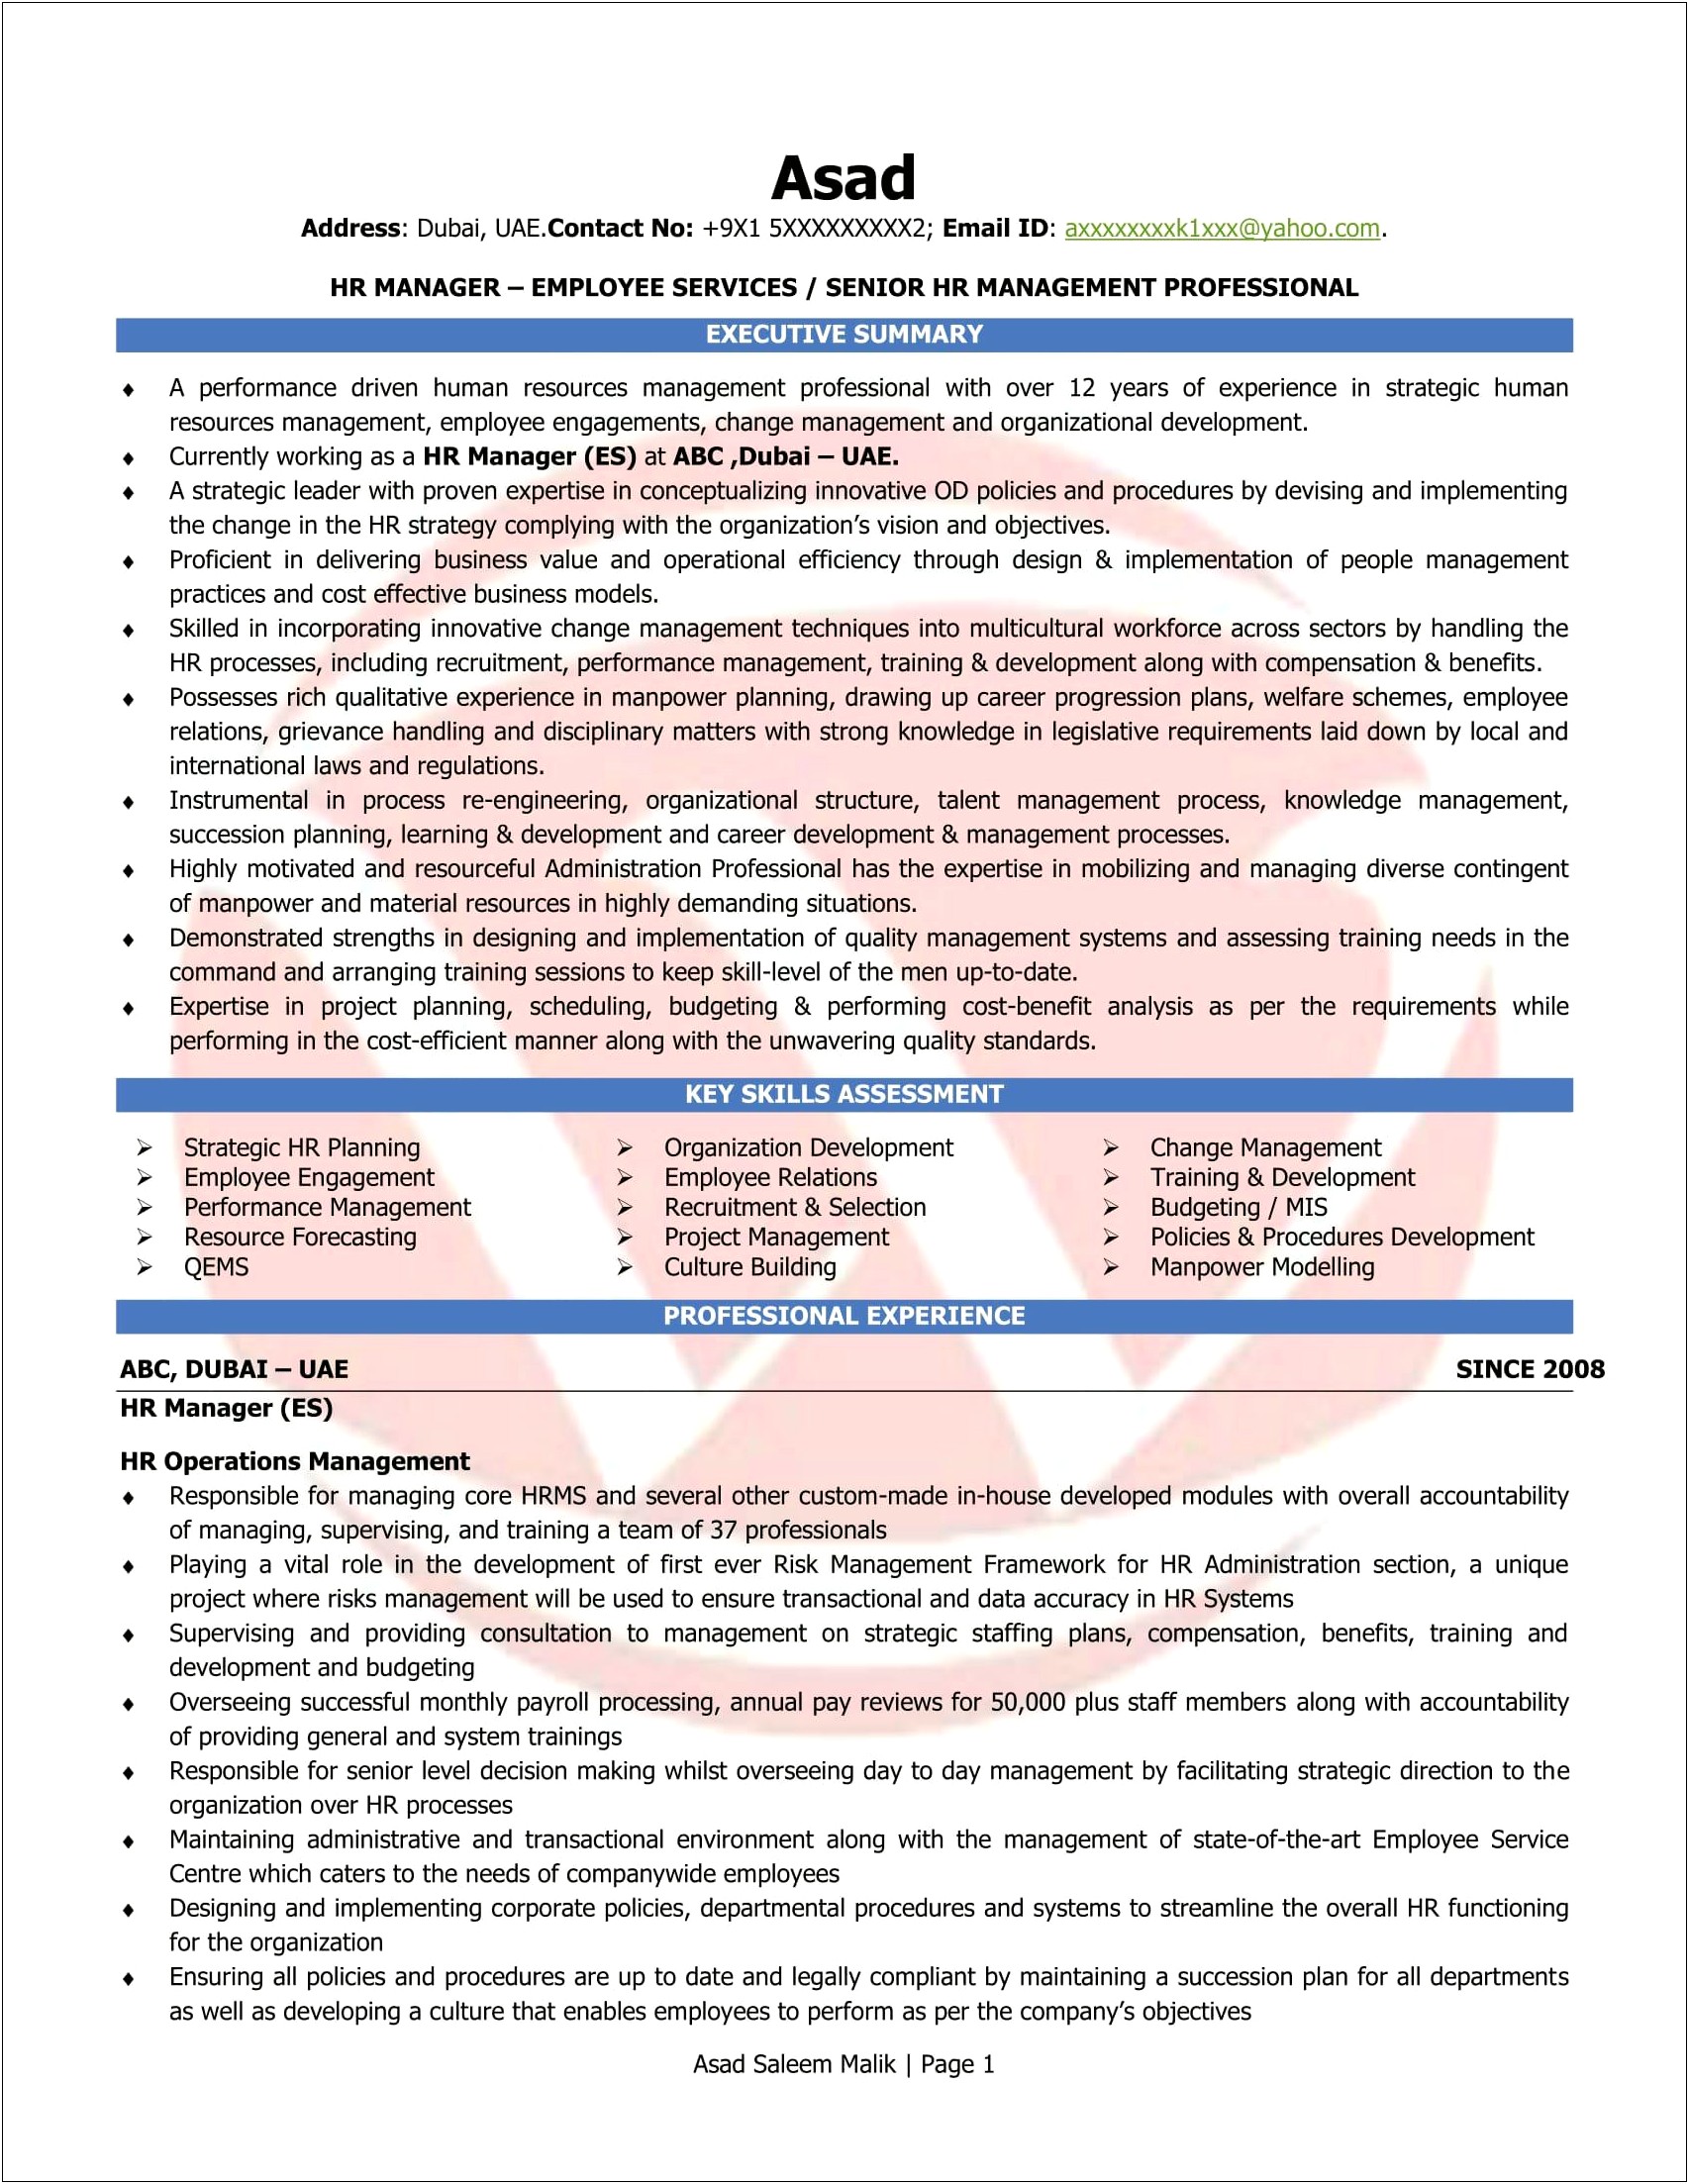 Monster Resume Examples Yahoo Mail